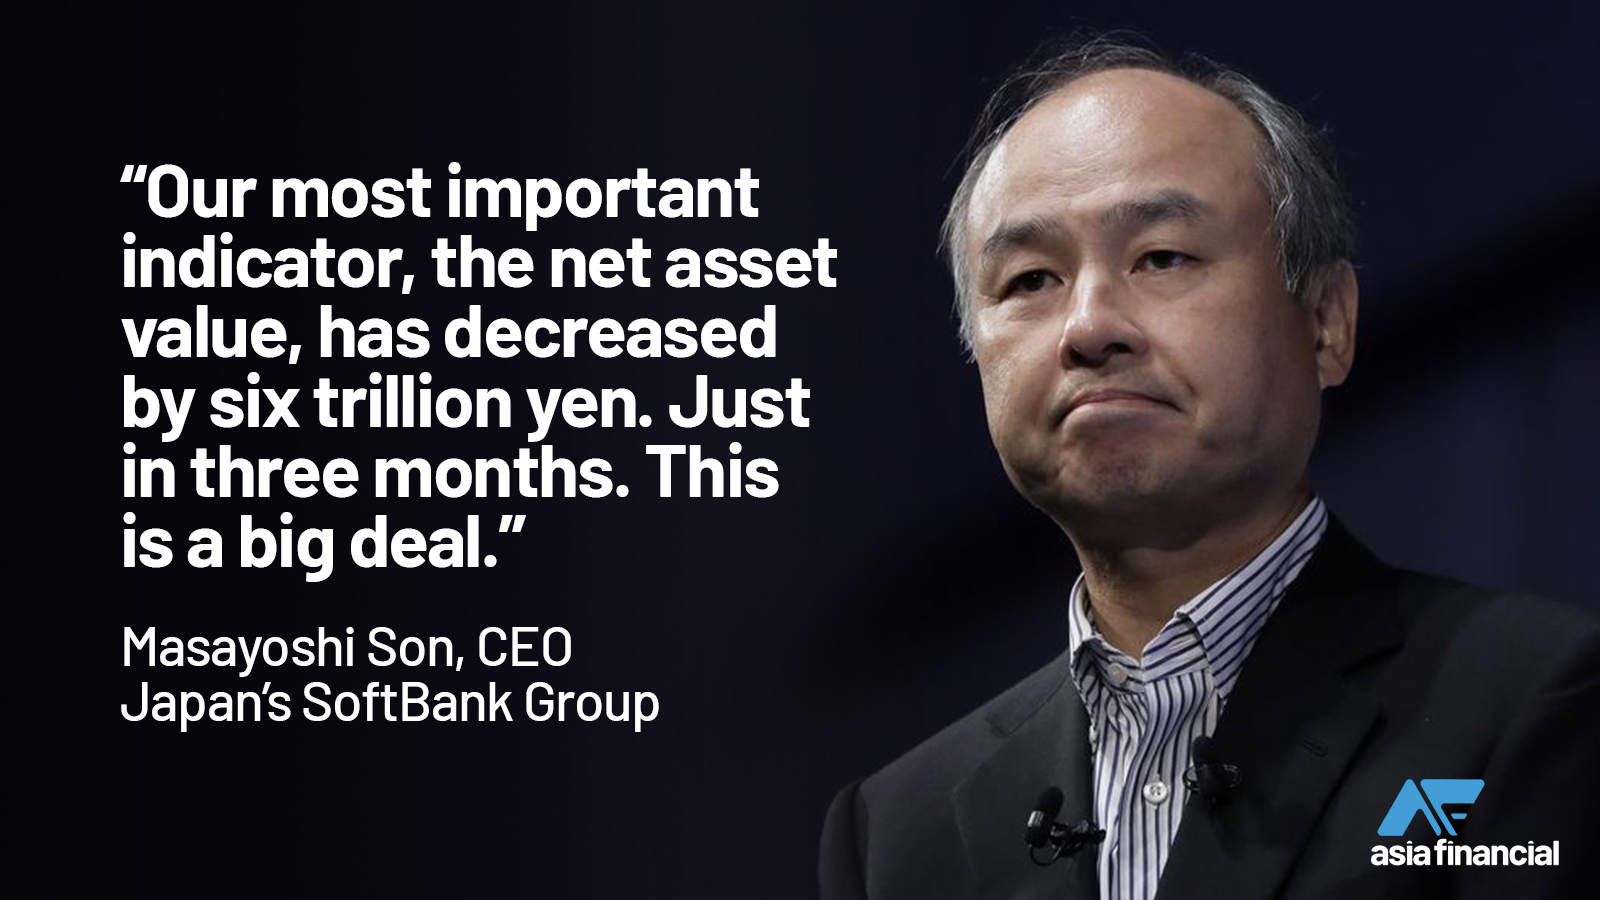 Japan’s SoftBank Group CEO Masayoshi Son said the firm was “in the middle of a blizzard” as shares of Alibaba Group Holding, SoftBank’s largest single investment, fell more than 30% in the three months ended September.